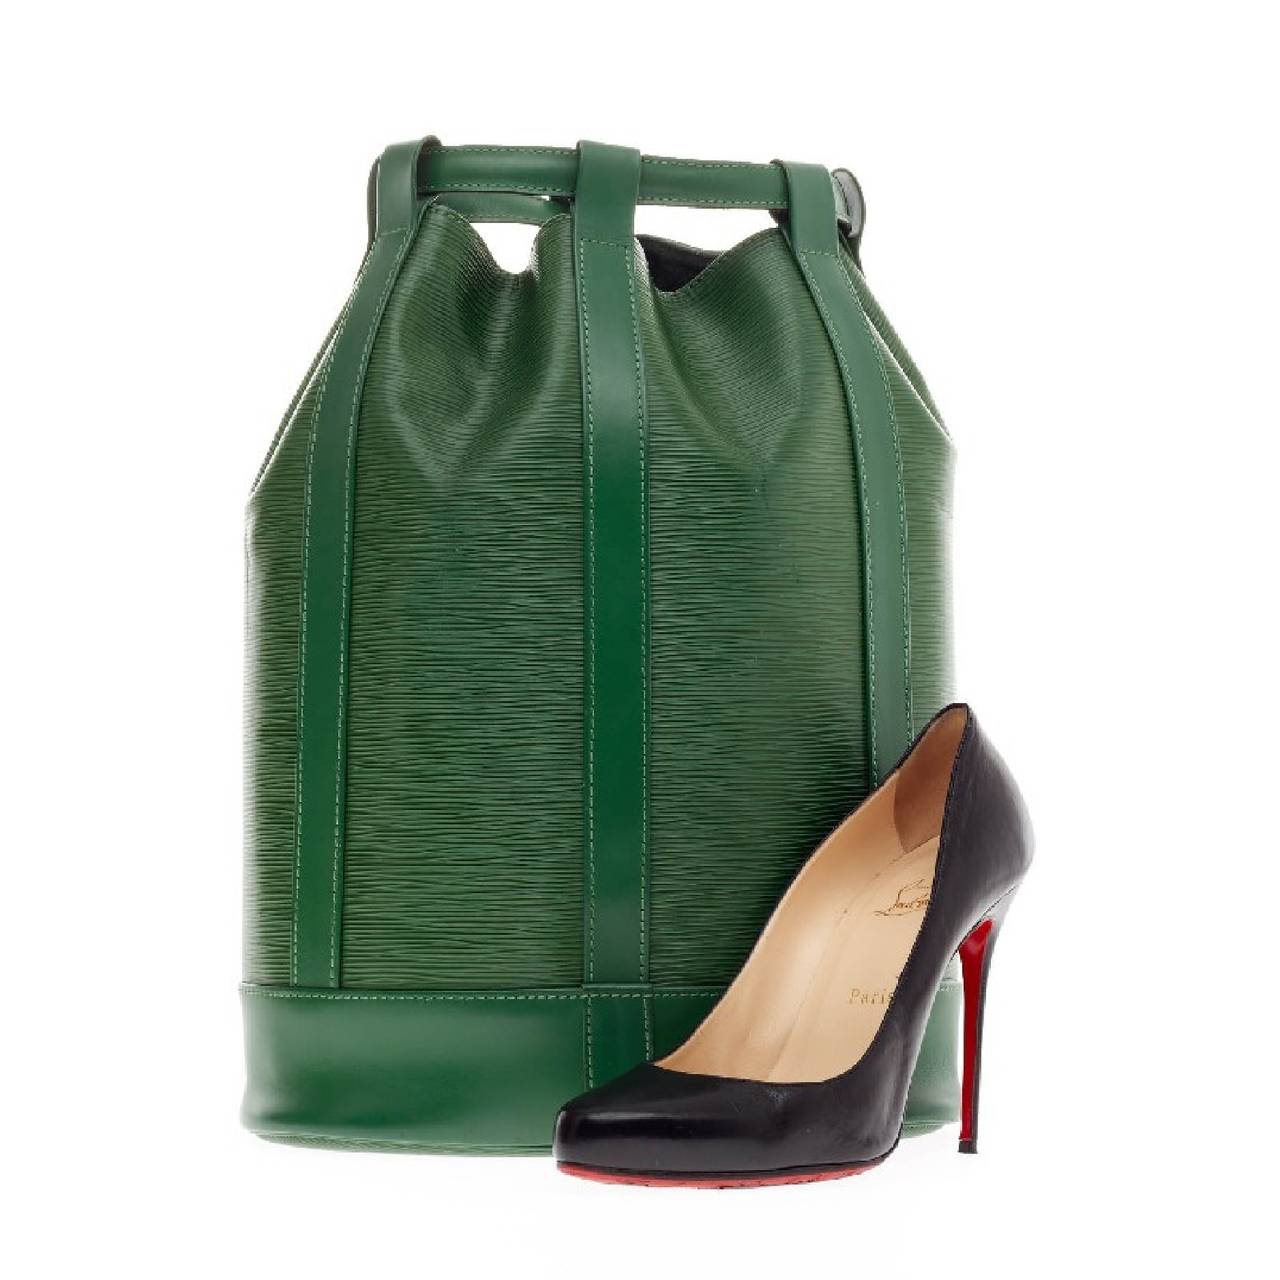 This authentic Louis Vuitton Randonnée Epi Leather PM in vivid green shade combines the functionality of an everyday carry-all and chicness in style all in one. The unique backpack opens to a spacious interior  that closes with the pull of the